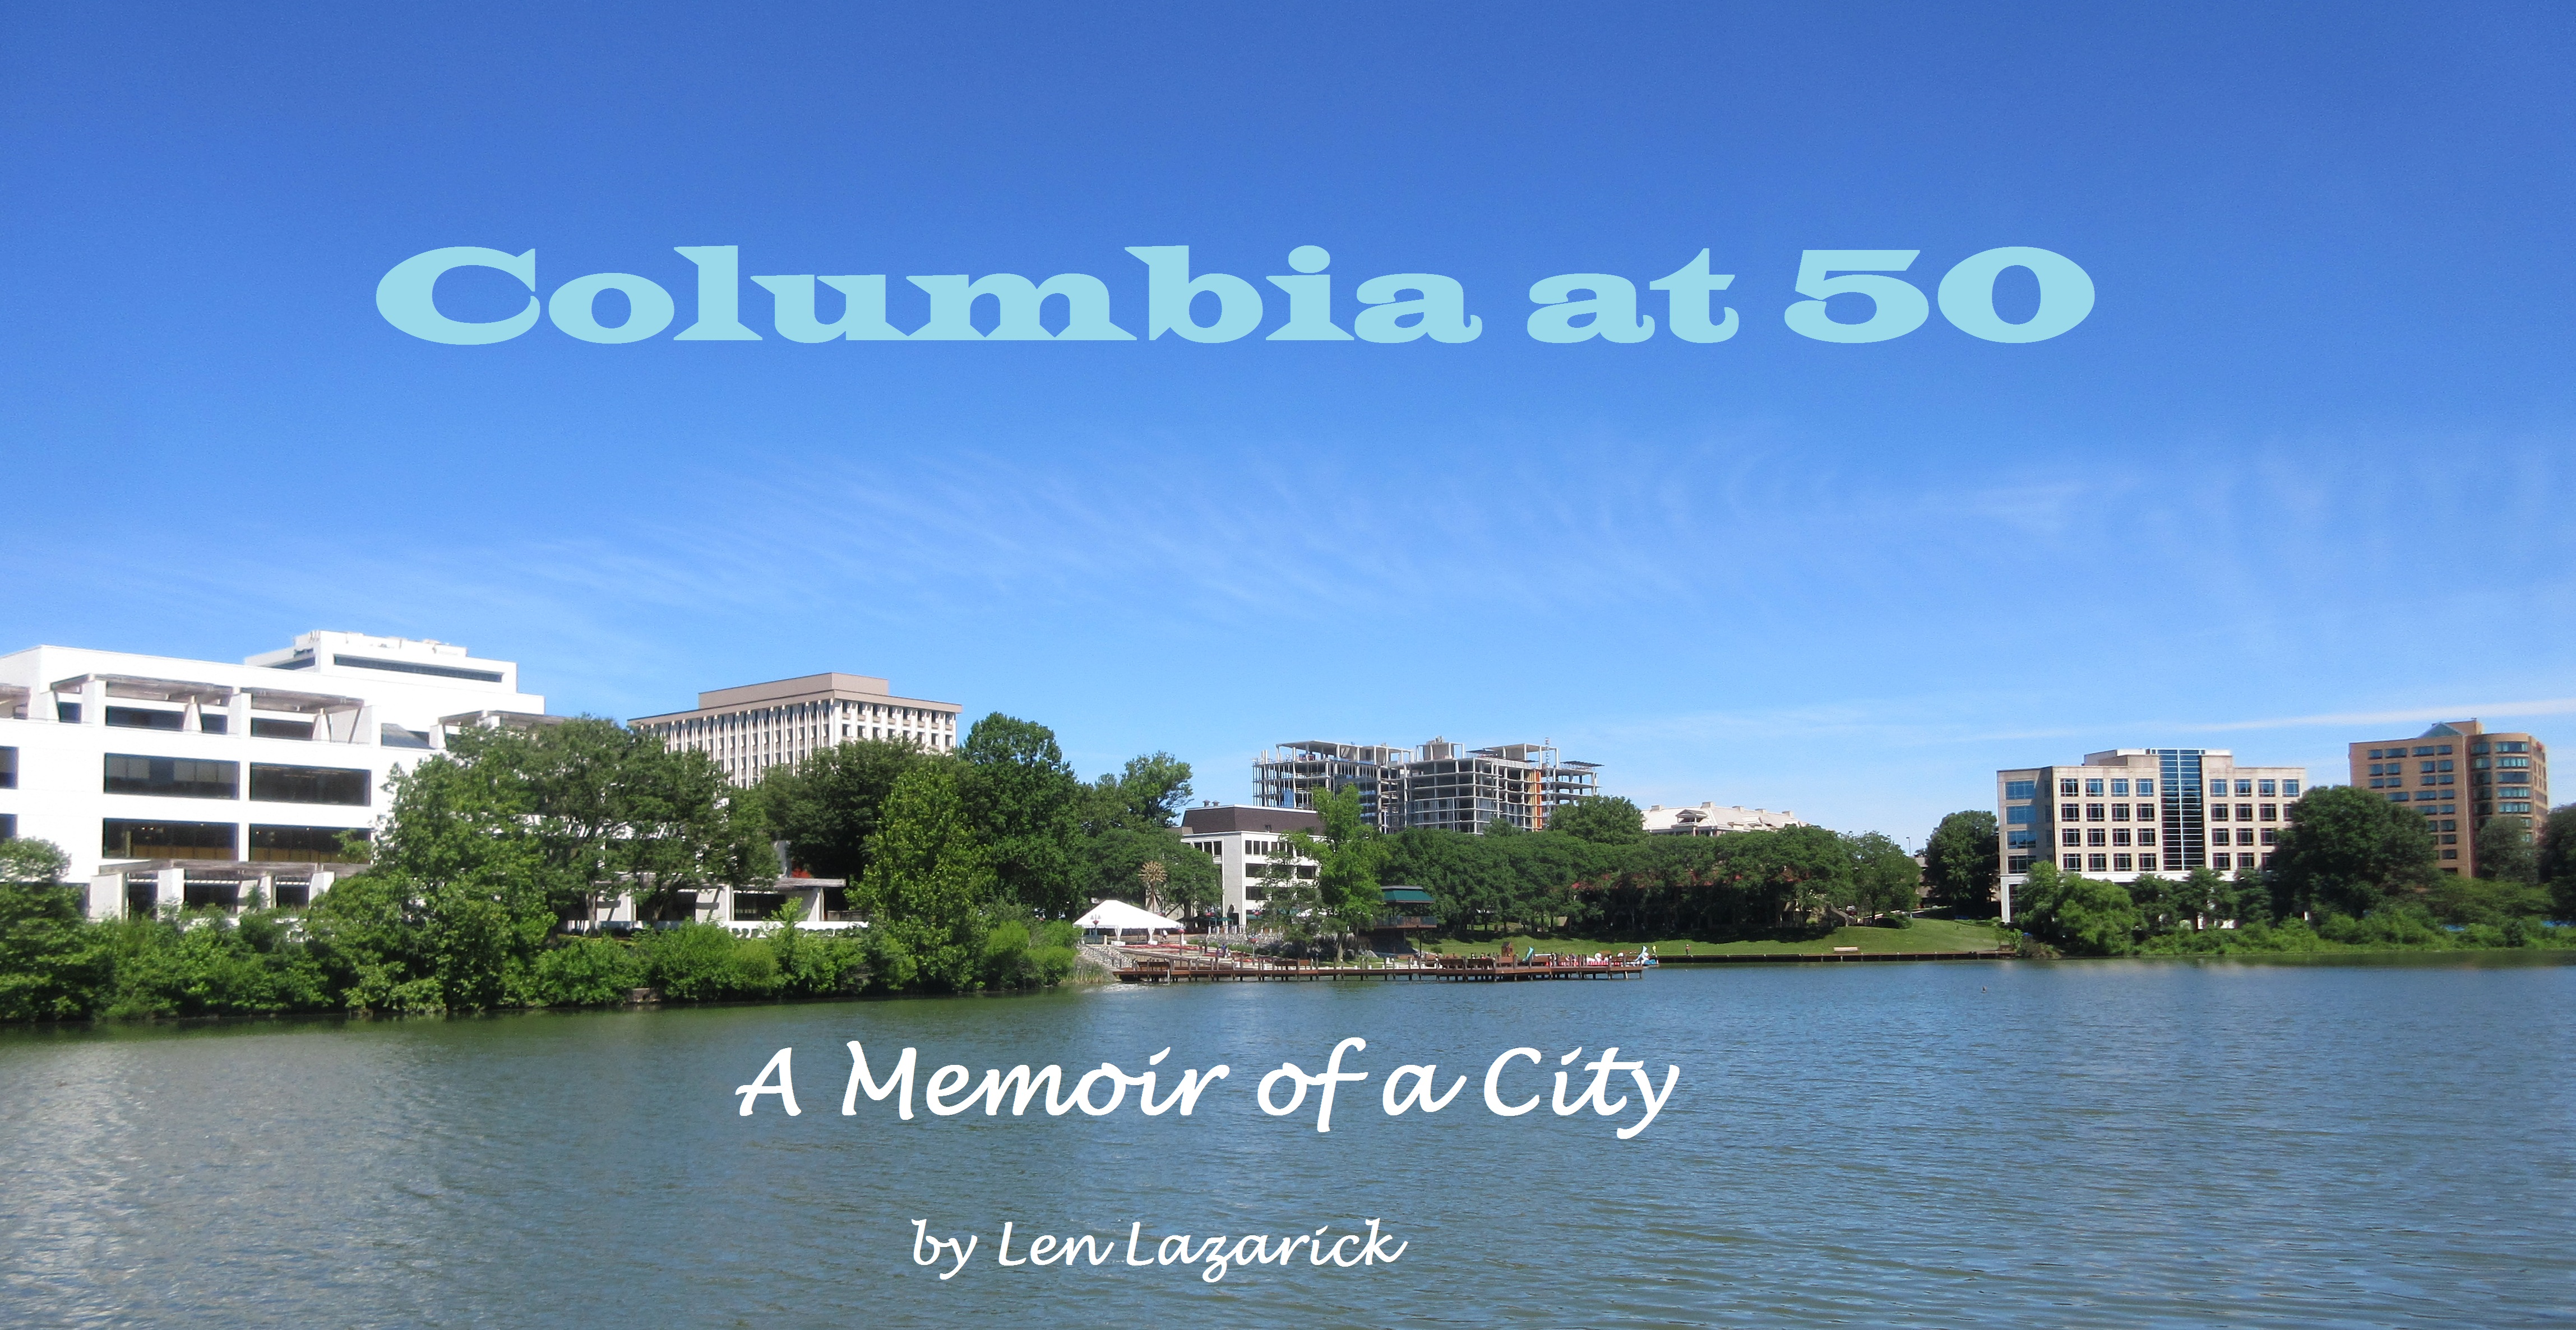 Part 3: Shopping and Retailing at the Heart of the Columbia Plan